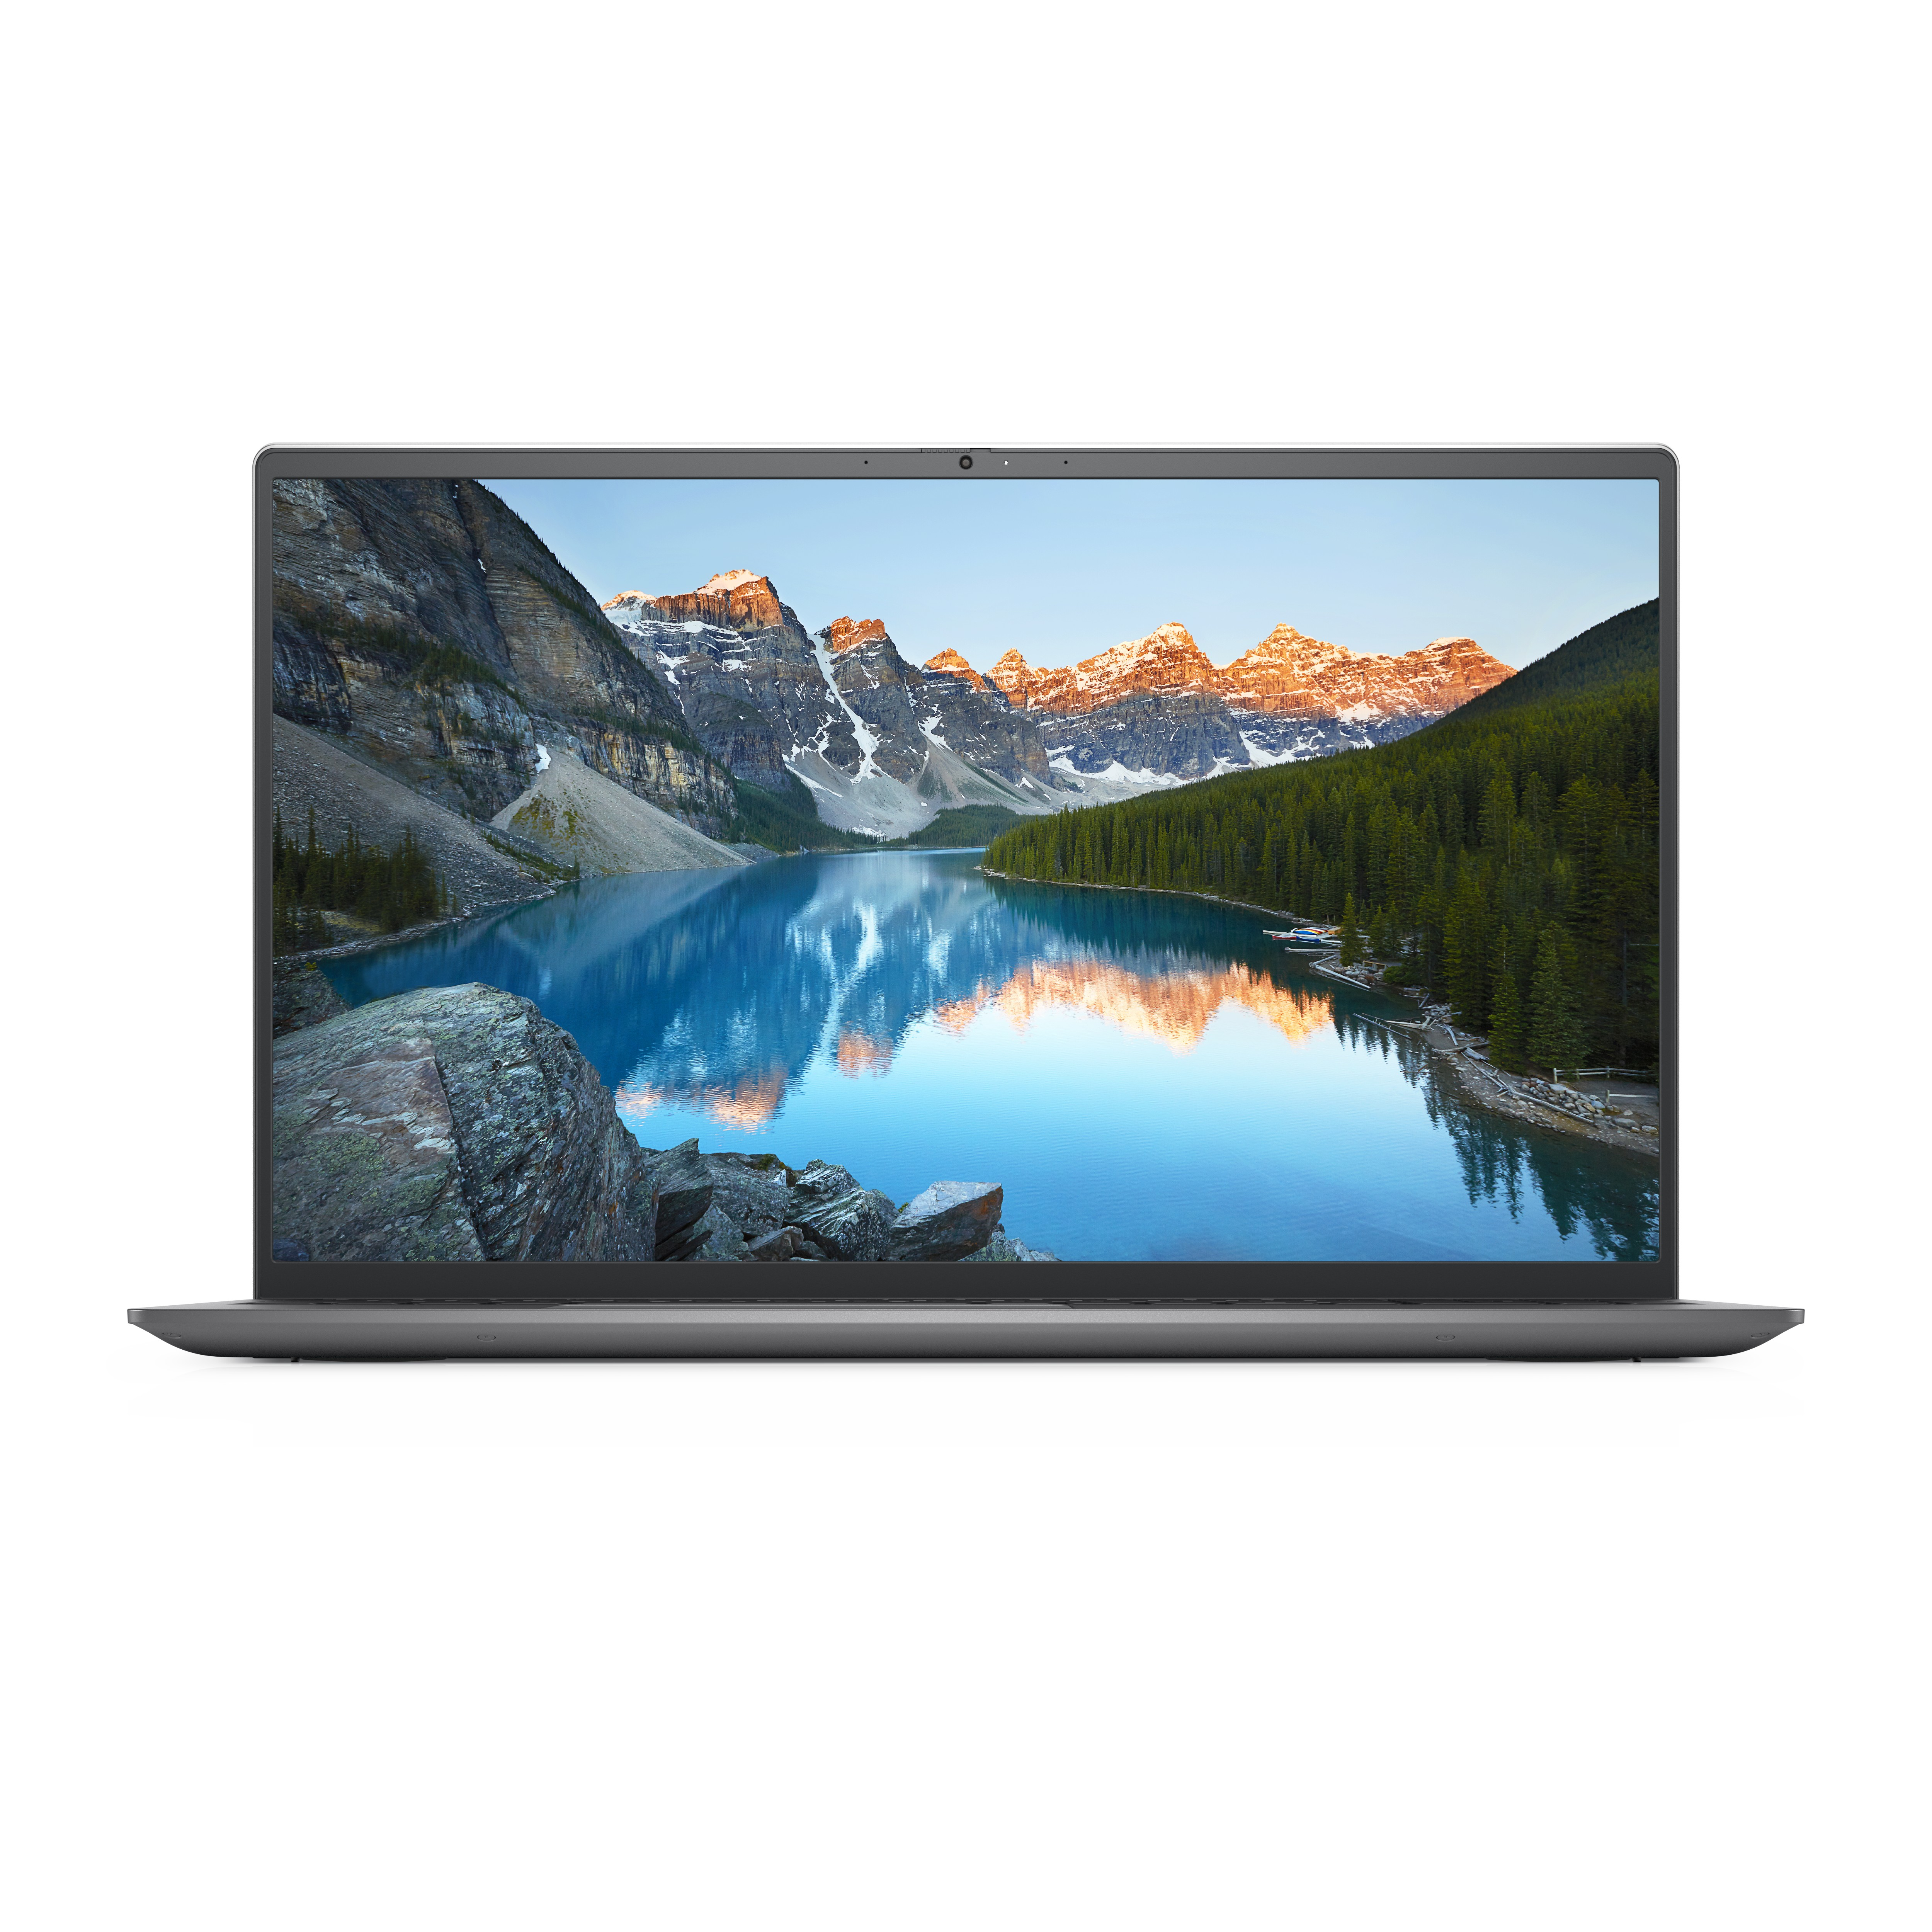 NOTEBOOK DELL INSPIRON 5510/I5 /8GB /512SSD /15,6 /IRISXE /W10HOME /1Y